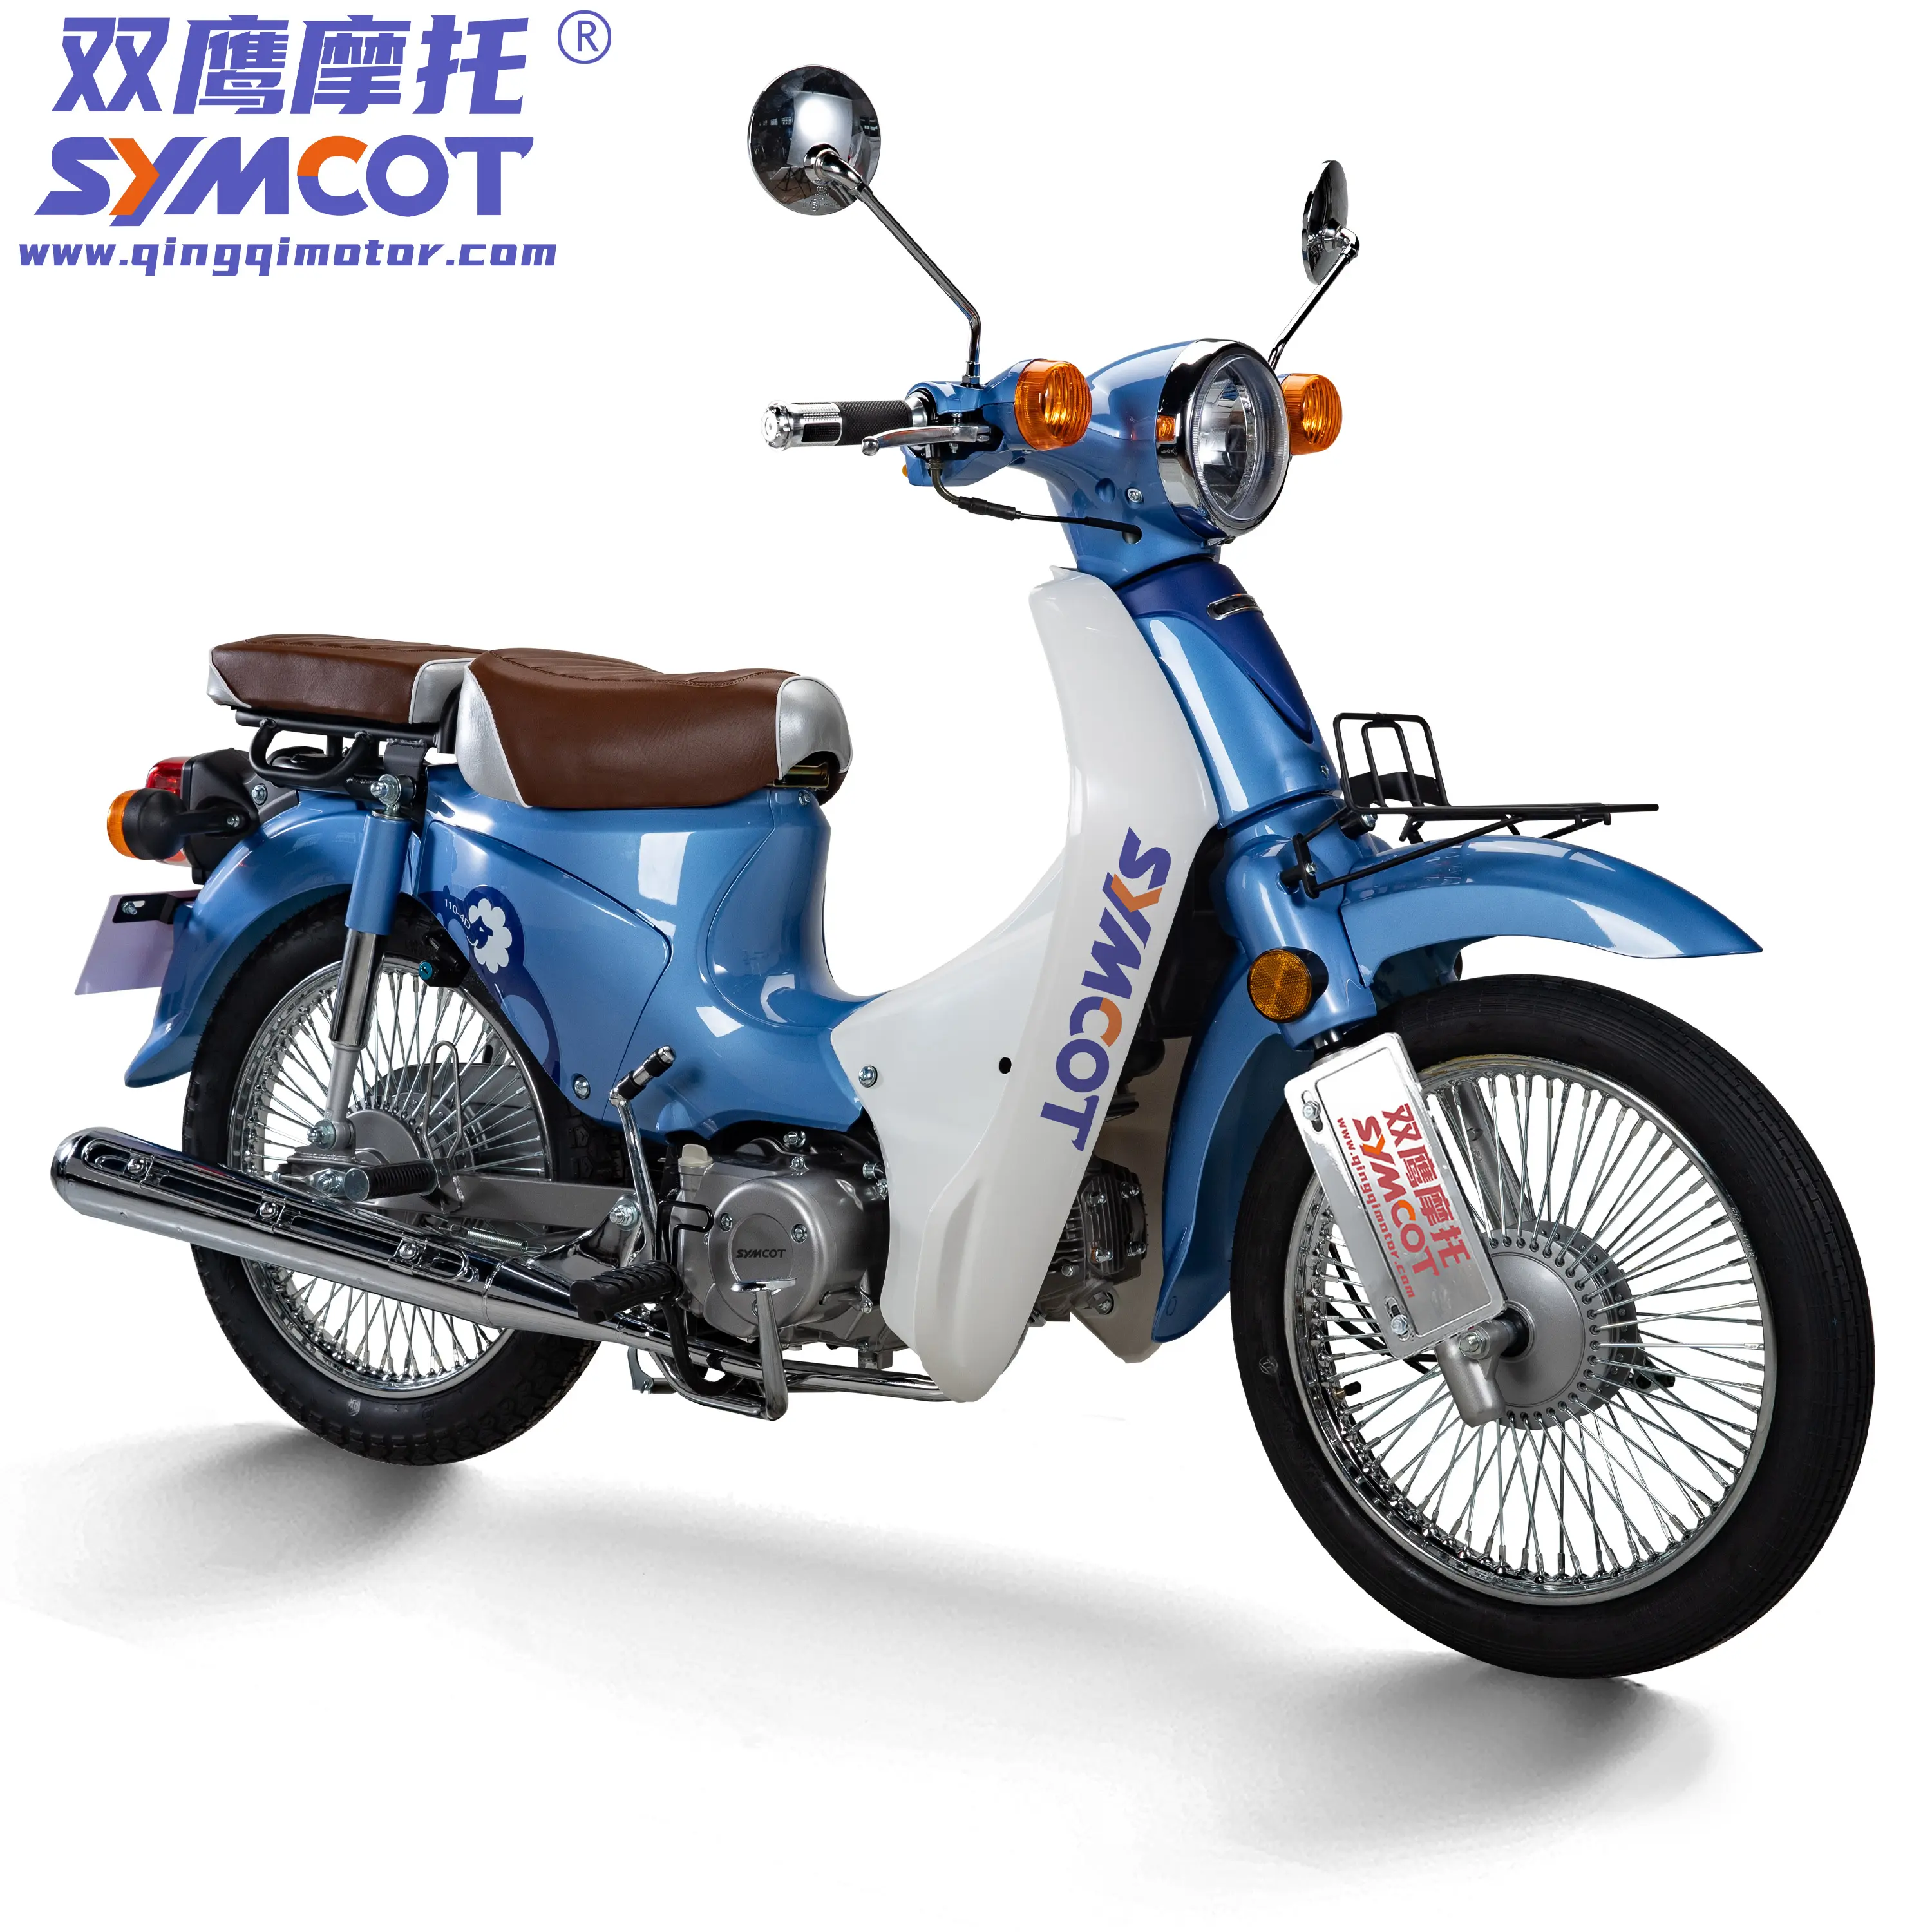 Super cub 49cc 110cc 125cc motorcycle 2022 new design hond type scooter for lady and kids horizontal engine